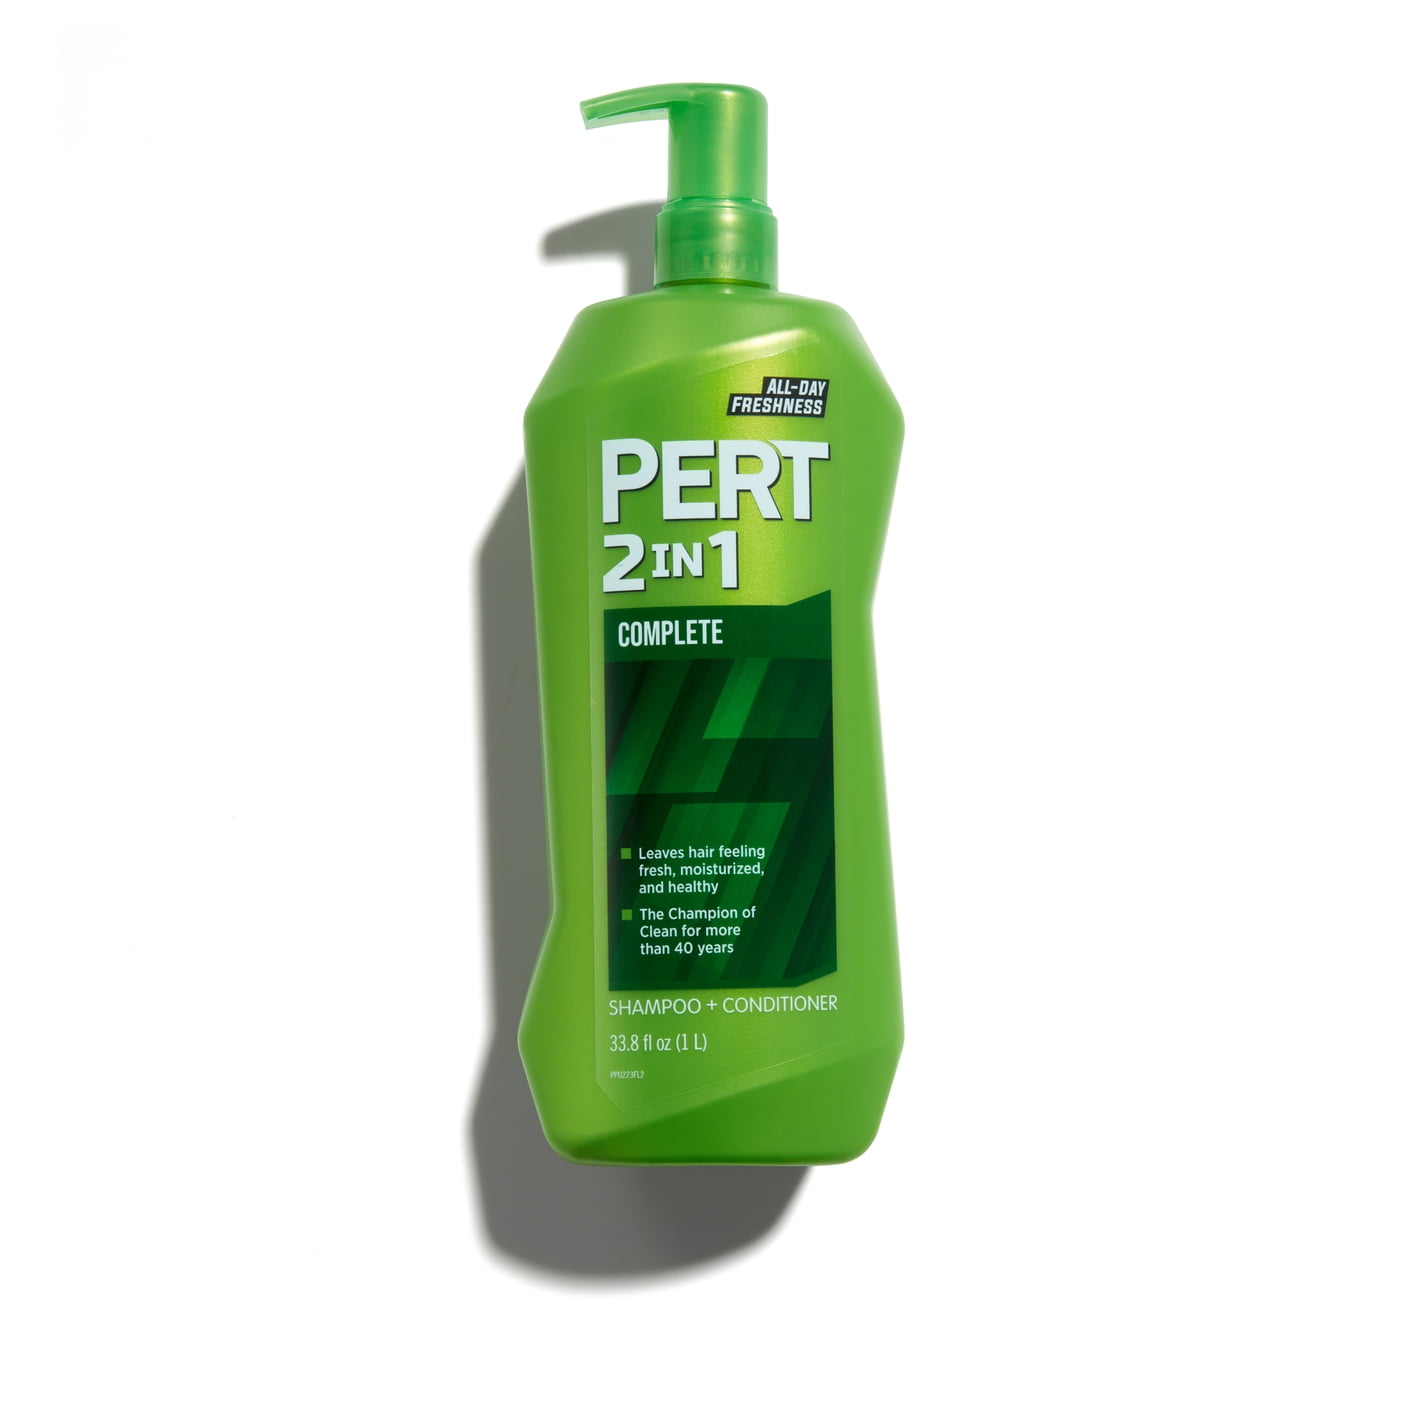 Pert 2 in 1 Complete Clean Shampoo & Conditioner, For Clean ...